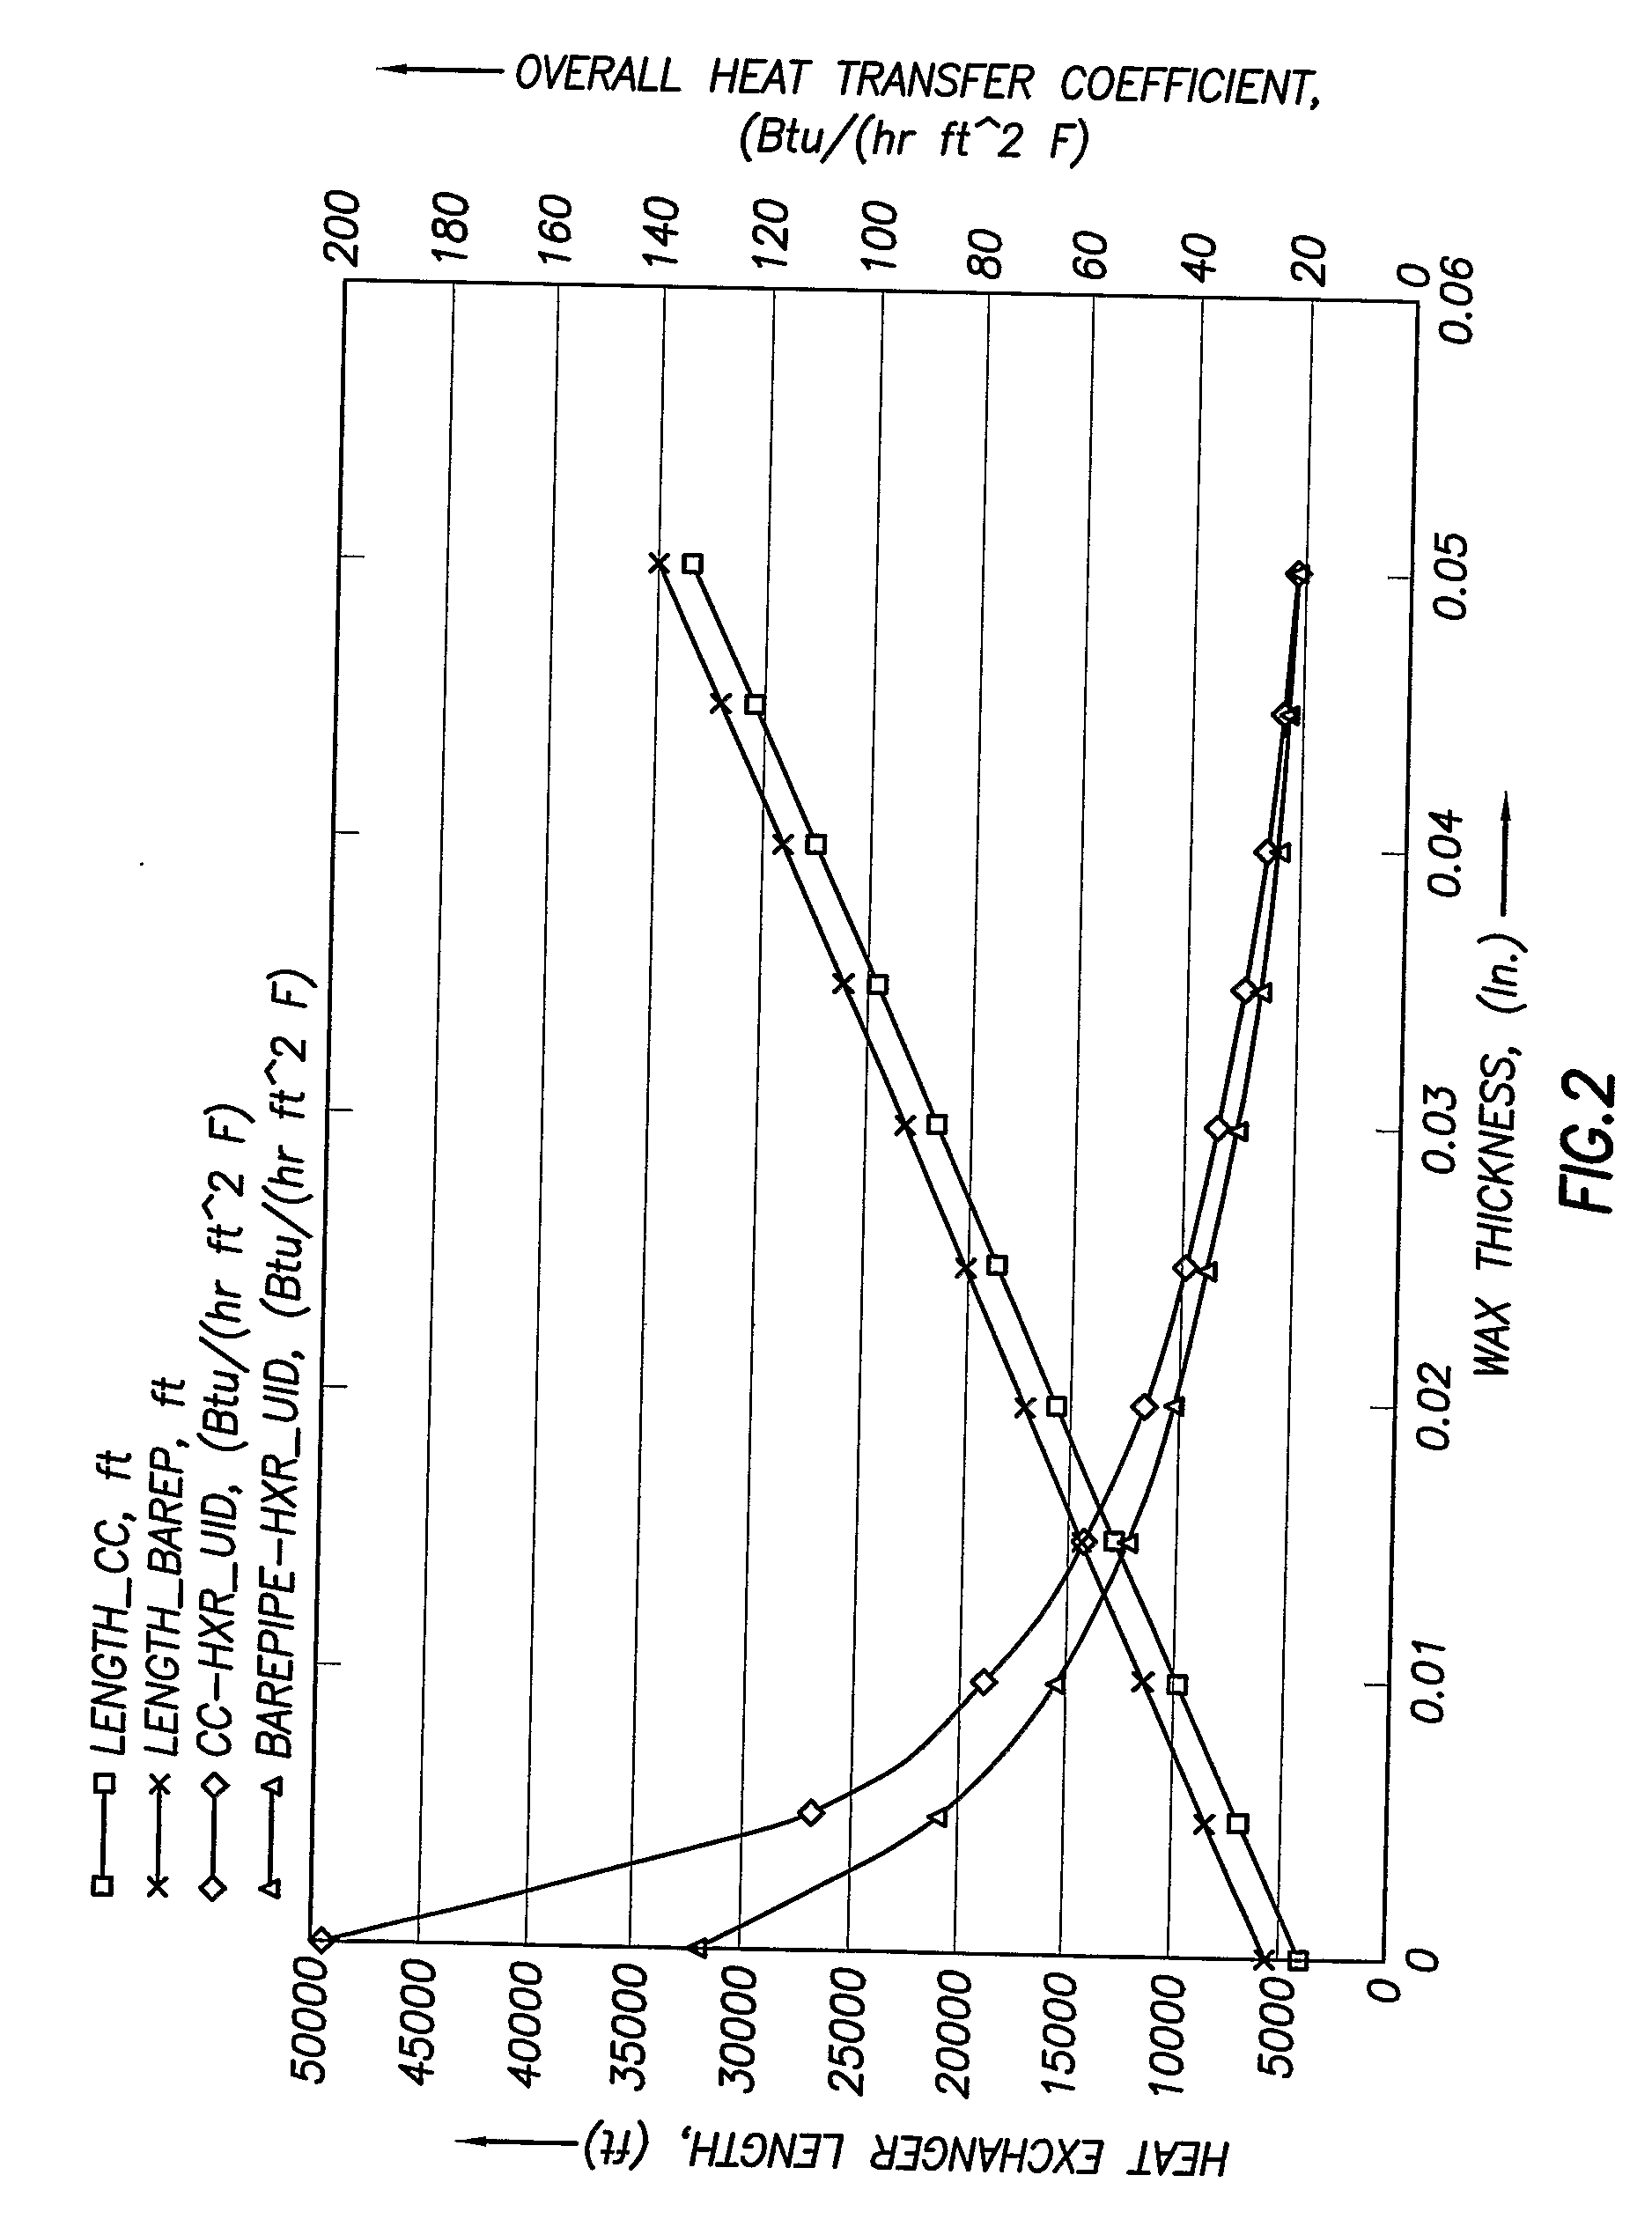 Method and Apparatus for a Cold Flow Subsea Hydrocarbon Production System